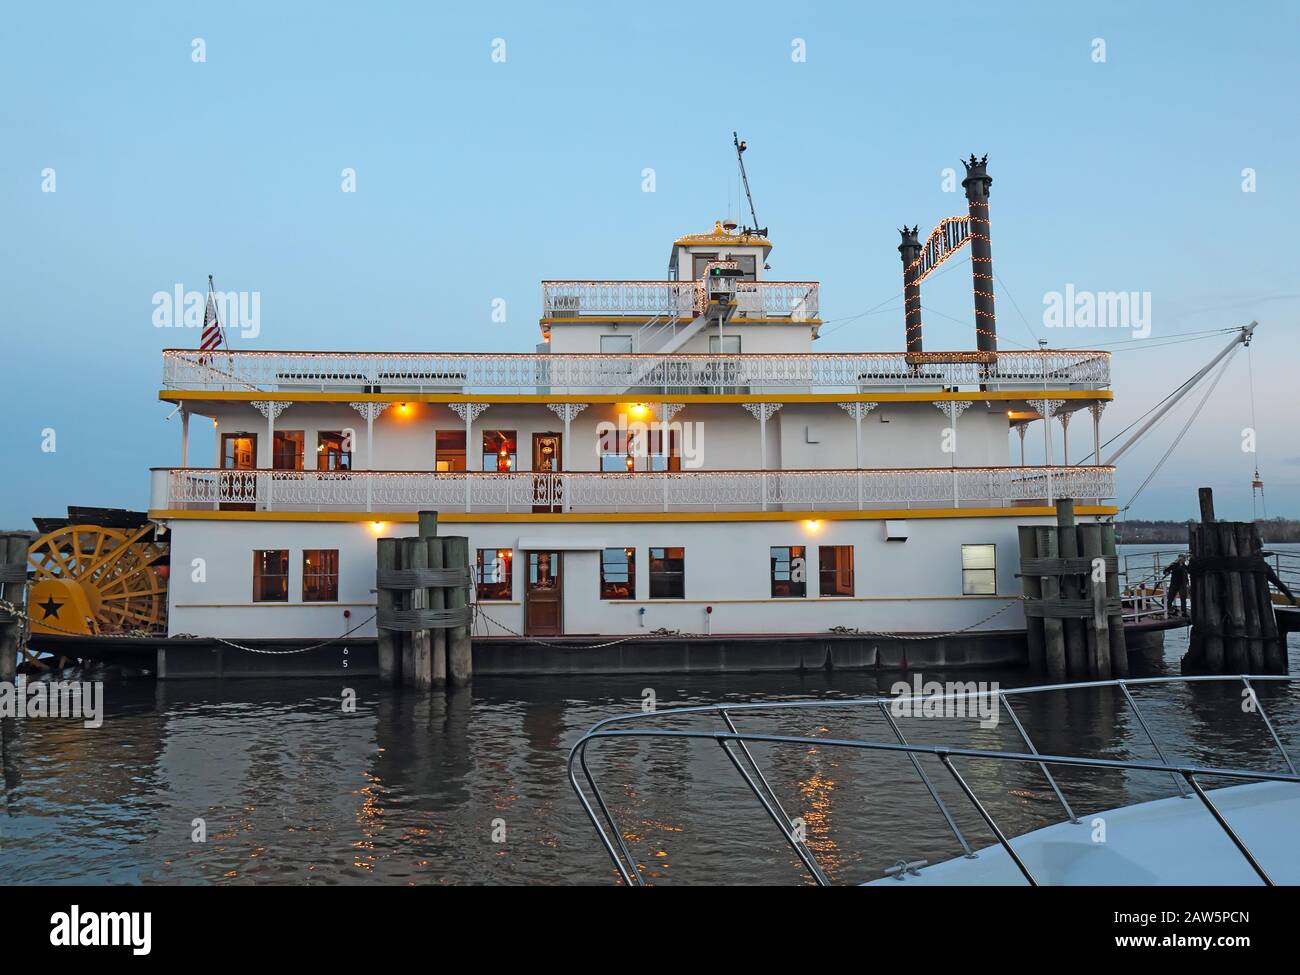 A paddlewheel boat at the waterfront of Alexandria, Virginia at sunset Stock Photo